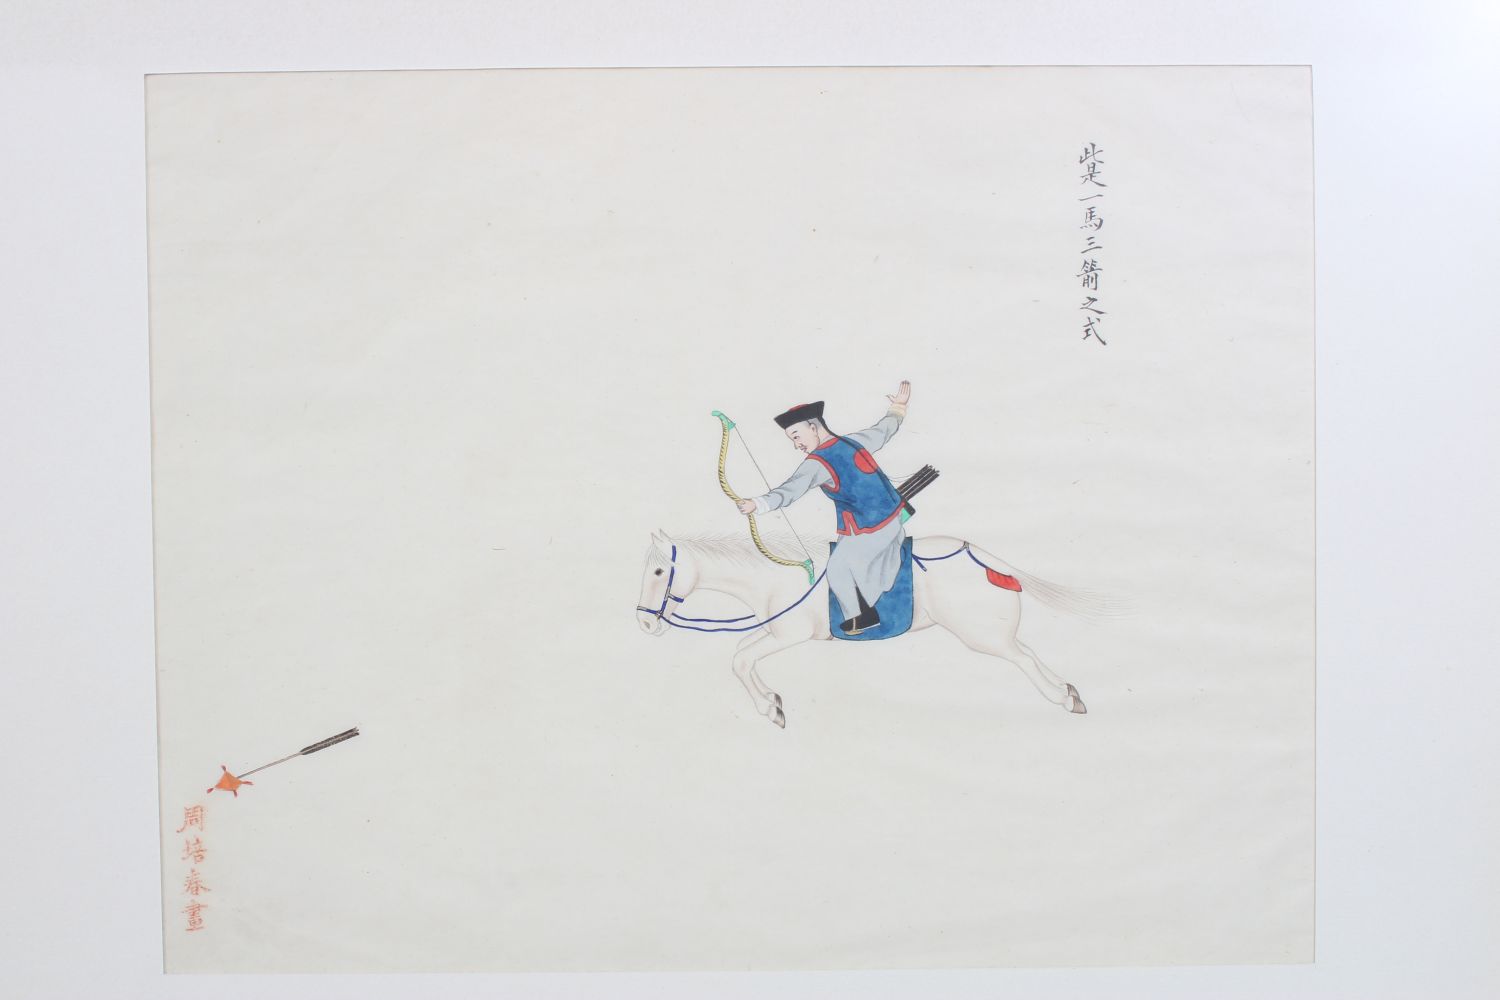 TWO 19TH CENTURY CHINESE PAINTINGS ON PAPER - HORSES & ACTORS, the pictures depicting a figure on - Image 3 of 9